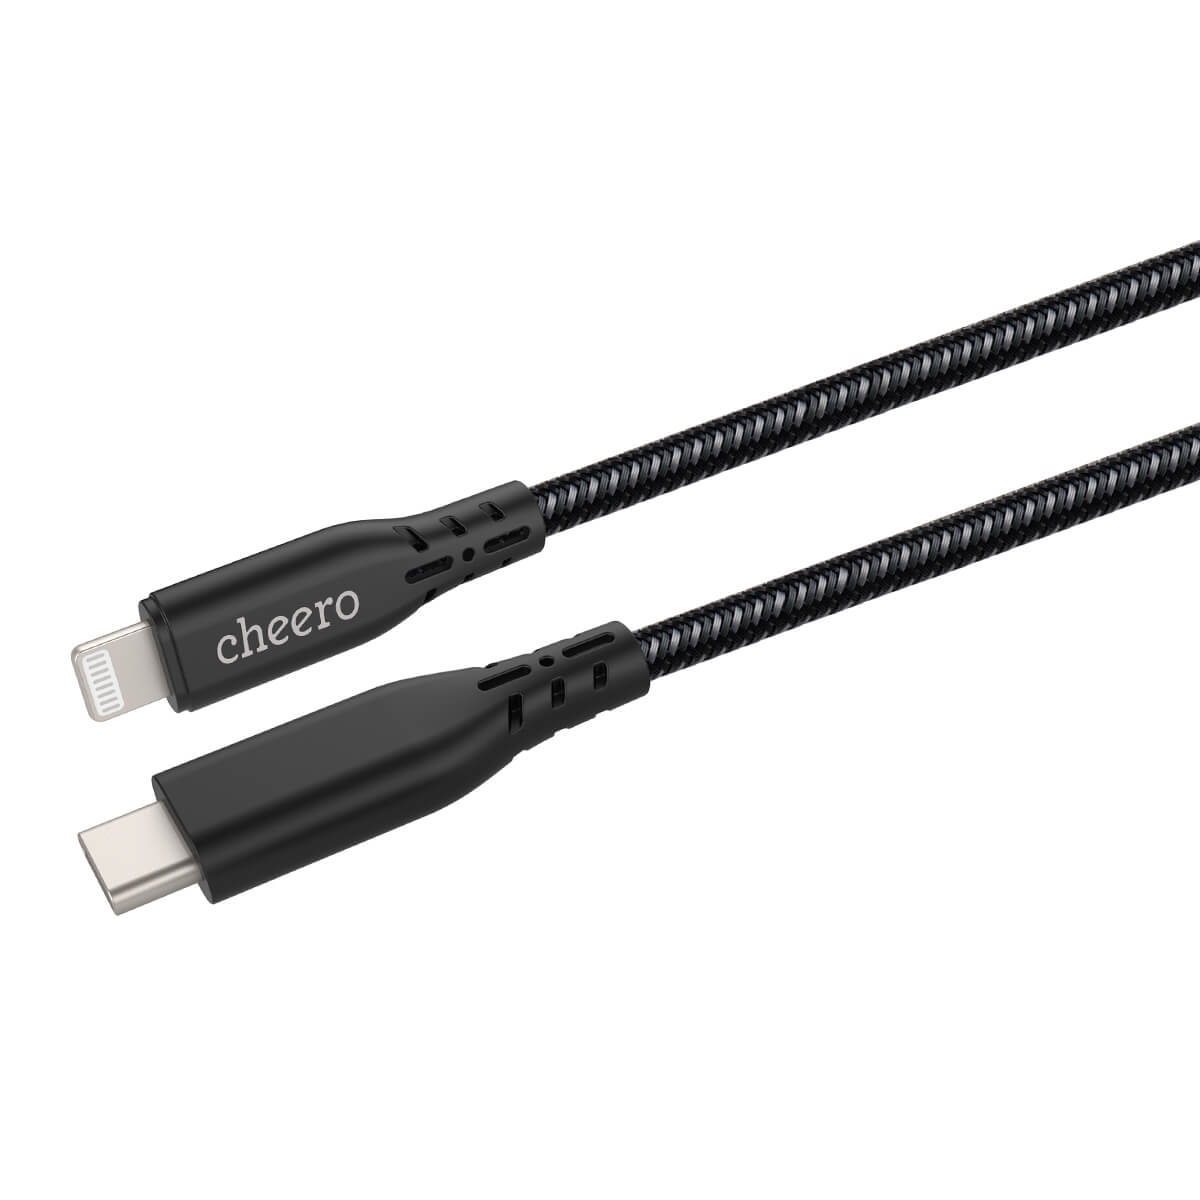 cheero Type-C to Lightning Cable – cheero_official